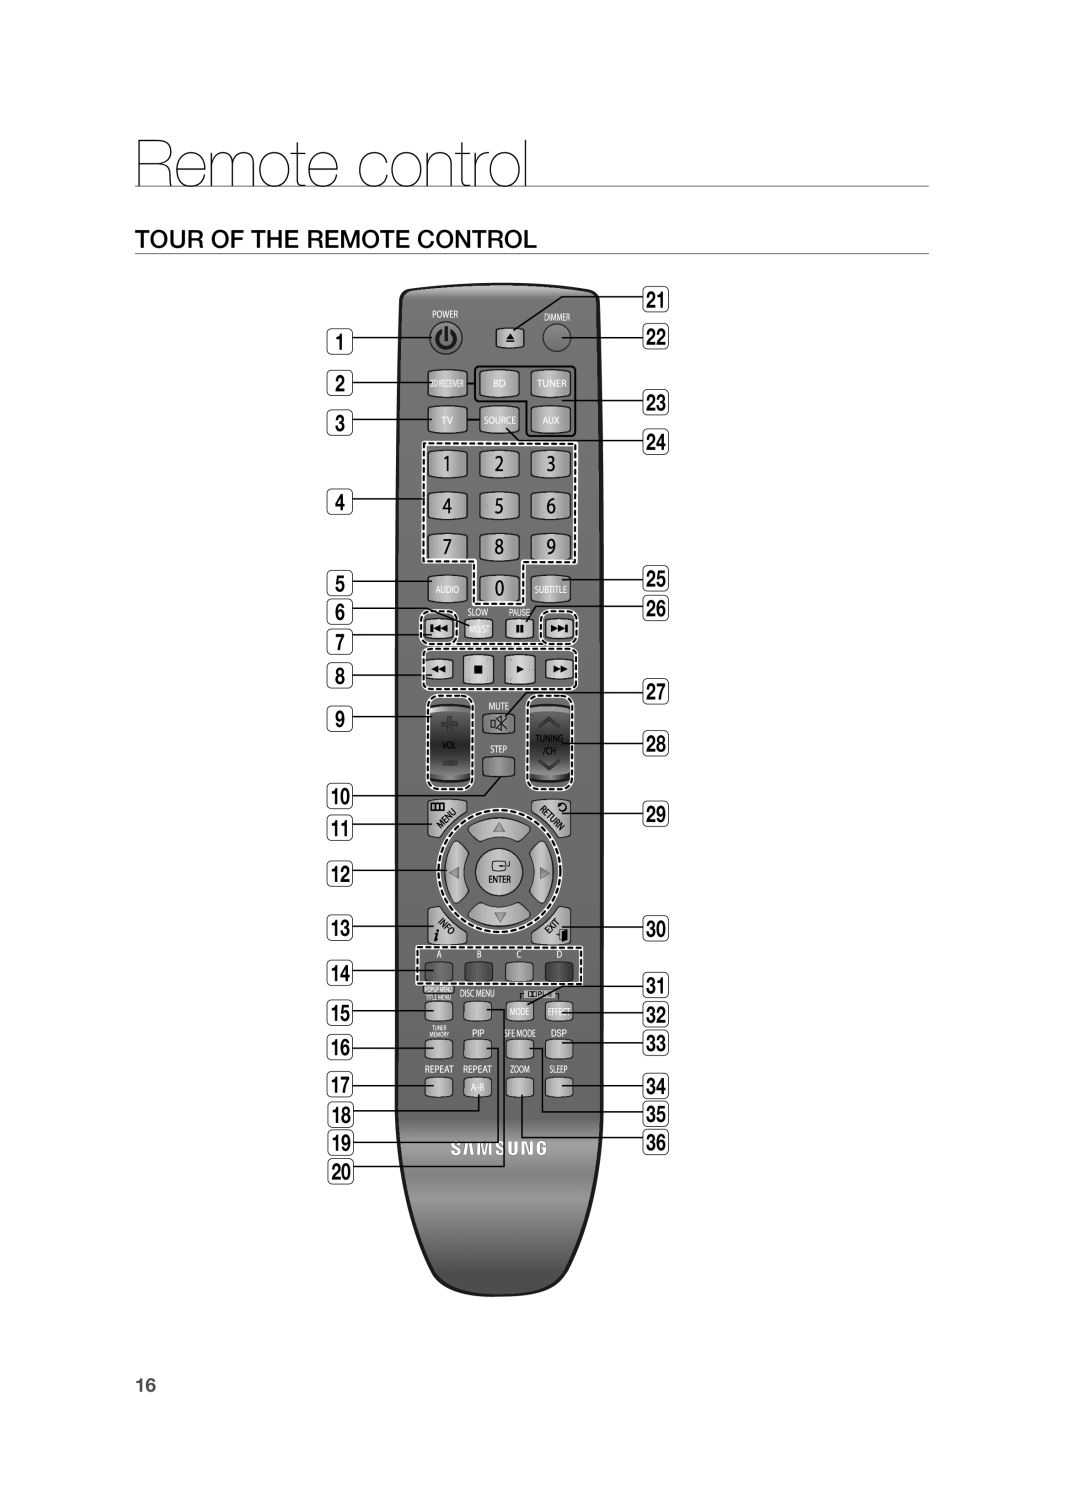 Samsung HT-BD3252 user manual Remote control, Tour Of The Remote Control, 1 2 3 4 5 6 7 8 9 10 11 12 13 14 15 16 17 18 19 